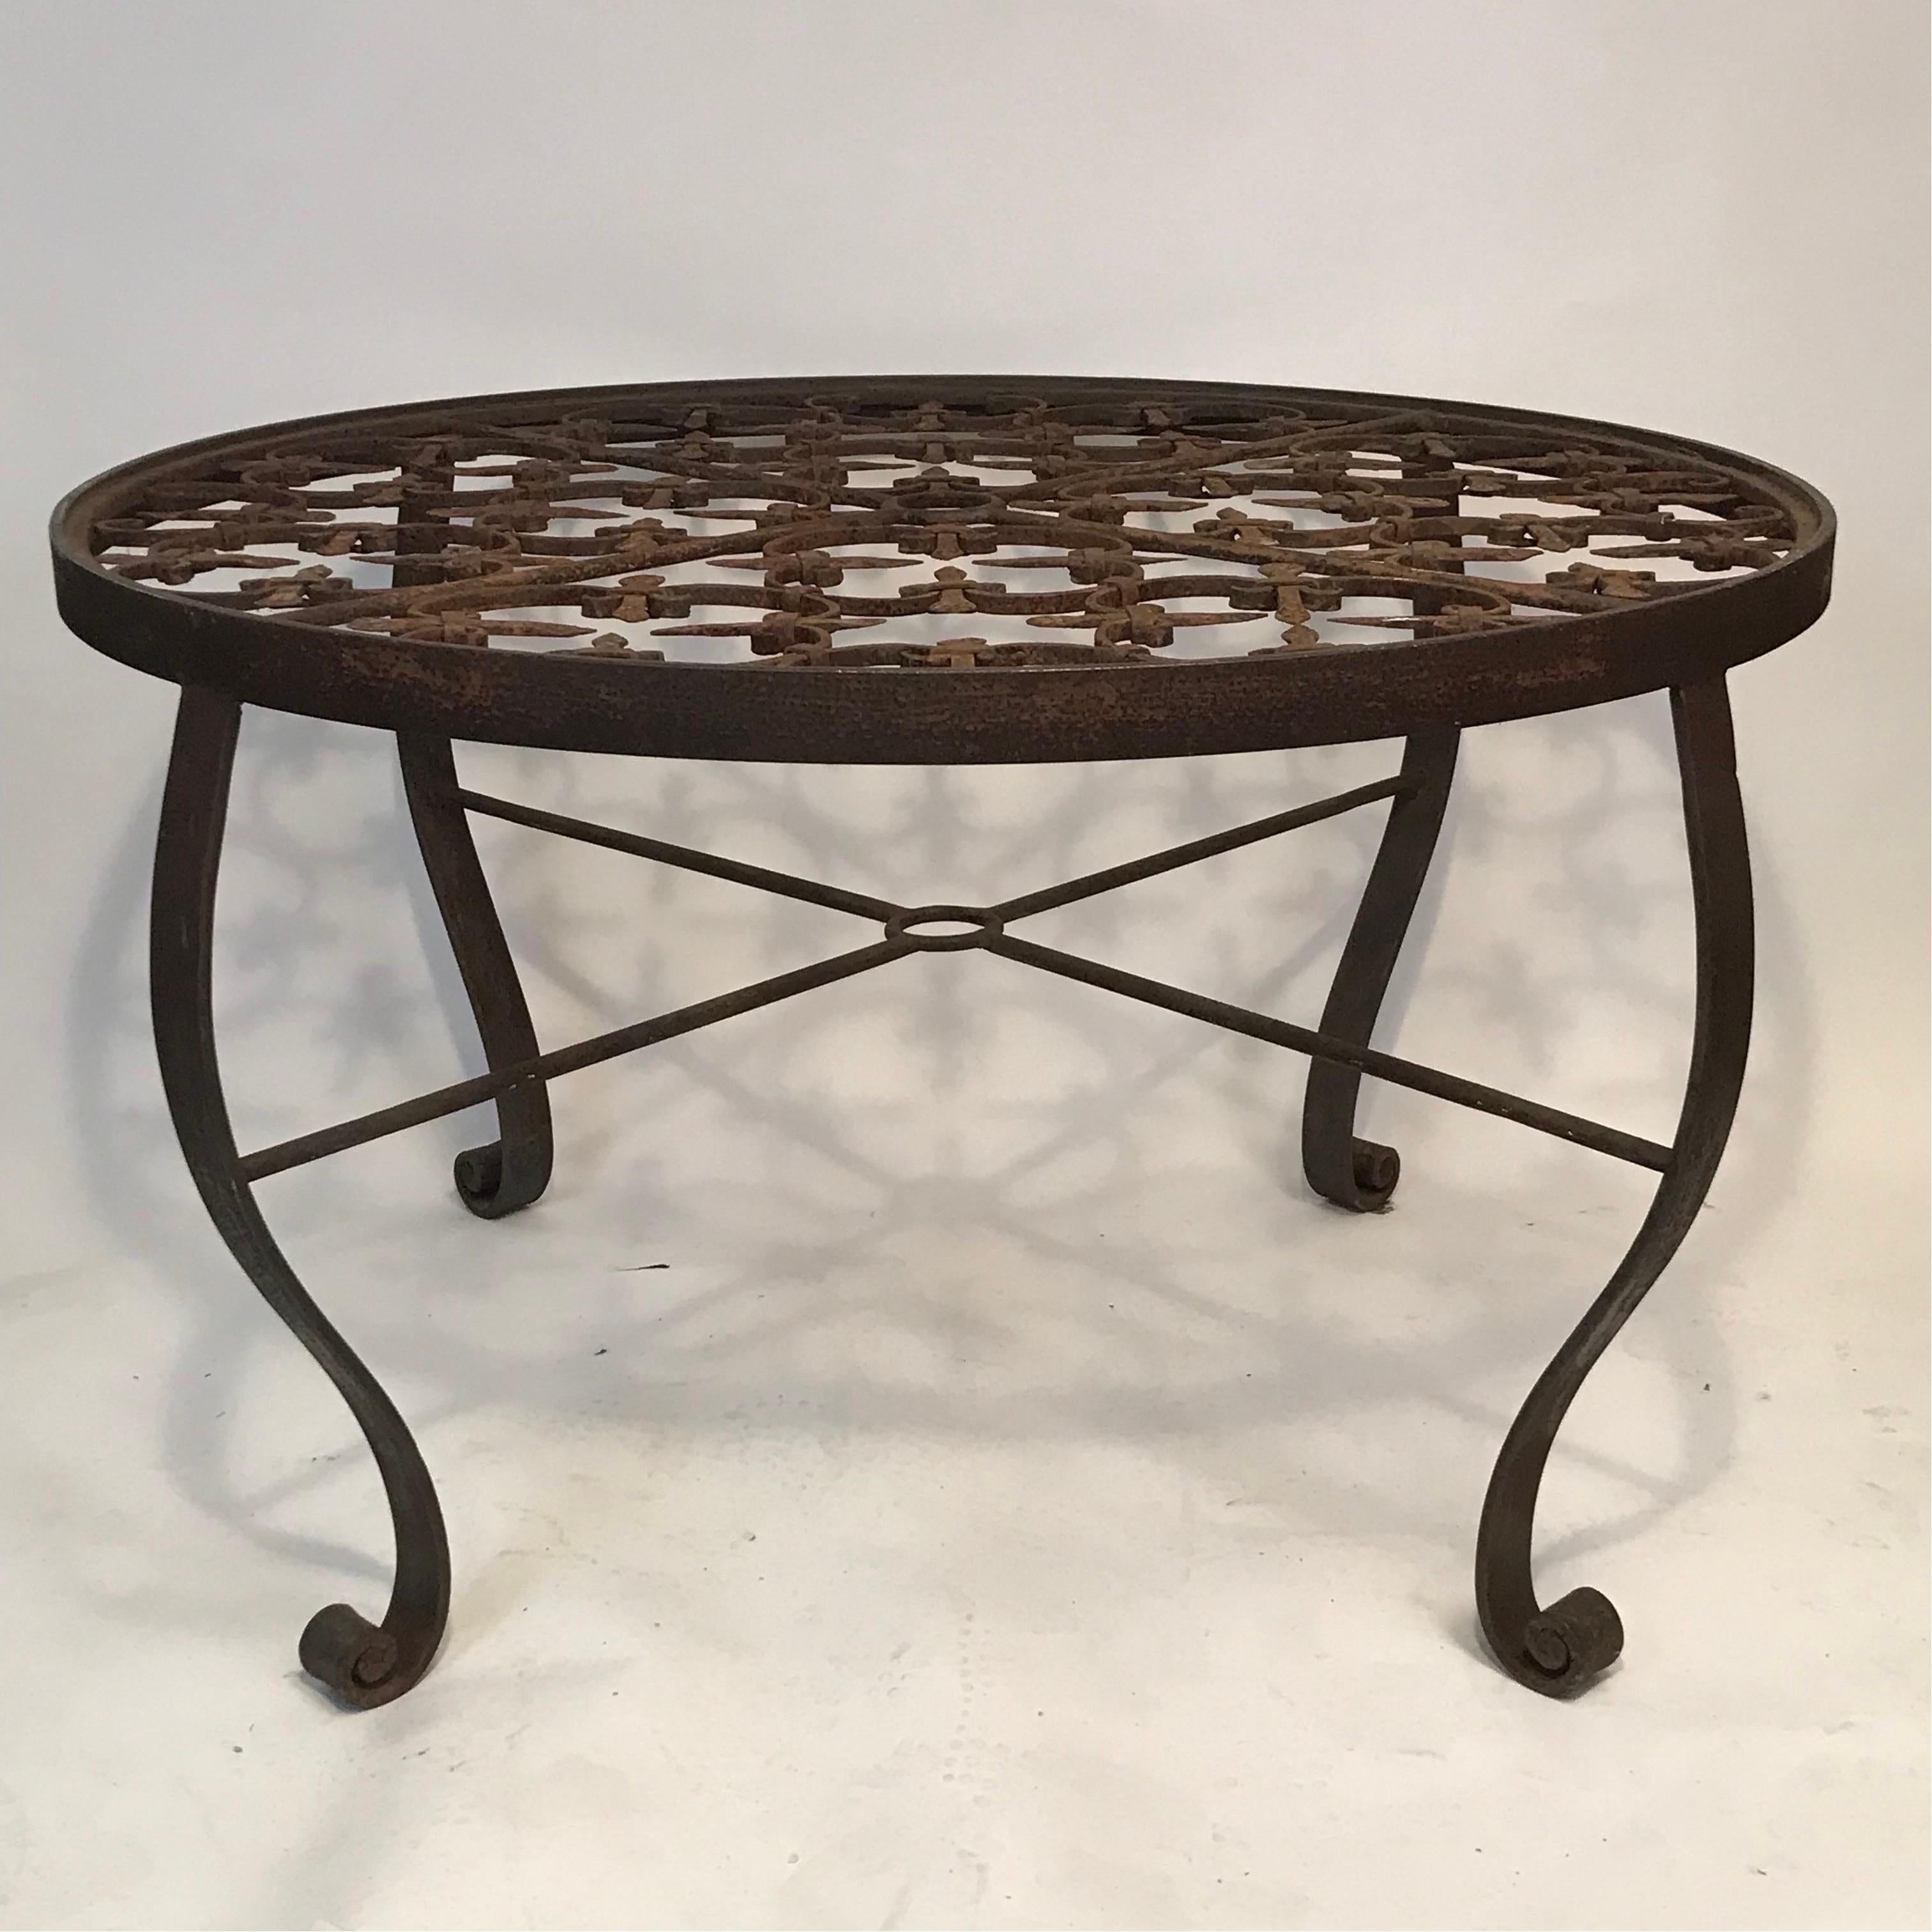 A contemporary outdoor garden table made from the architectural remnants of an early 20th  Century French outdoor gate set in an iron hoop frame recessed for a glass top set on euro antique styled curved legs in the same steel banding as the hoop,